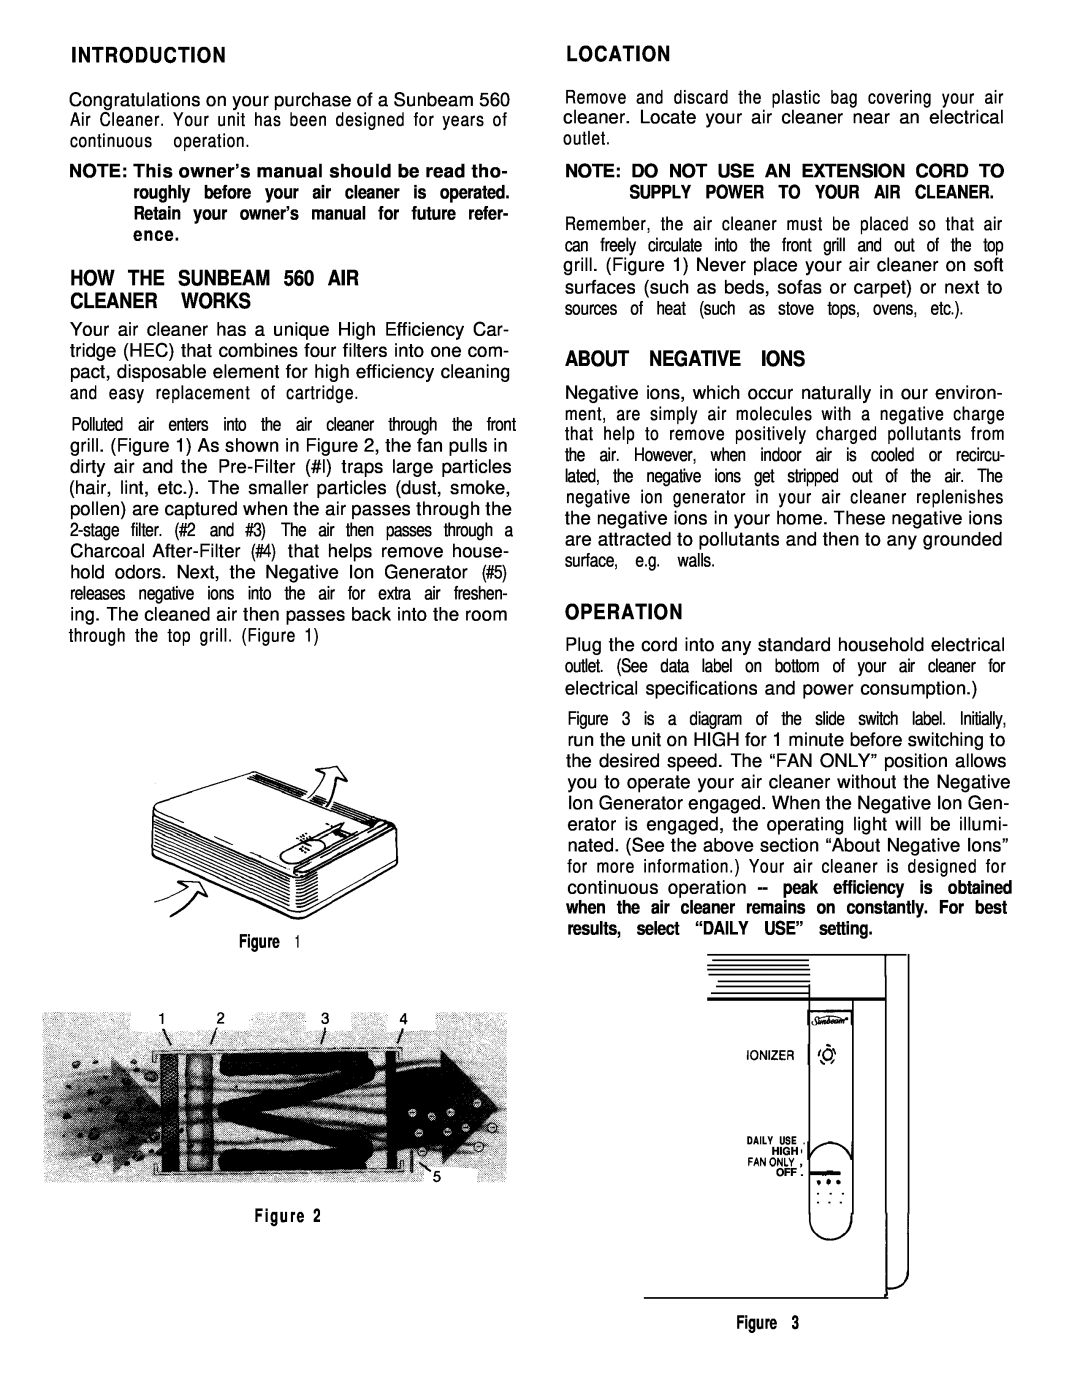 Sunbeam 2570 owner manual Introduction, HOW THE SUNBEAM 560 AIR CLEANER WORKS, Location, About Negative Ions, Operation 